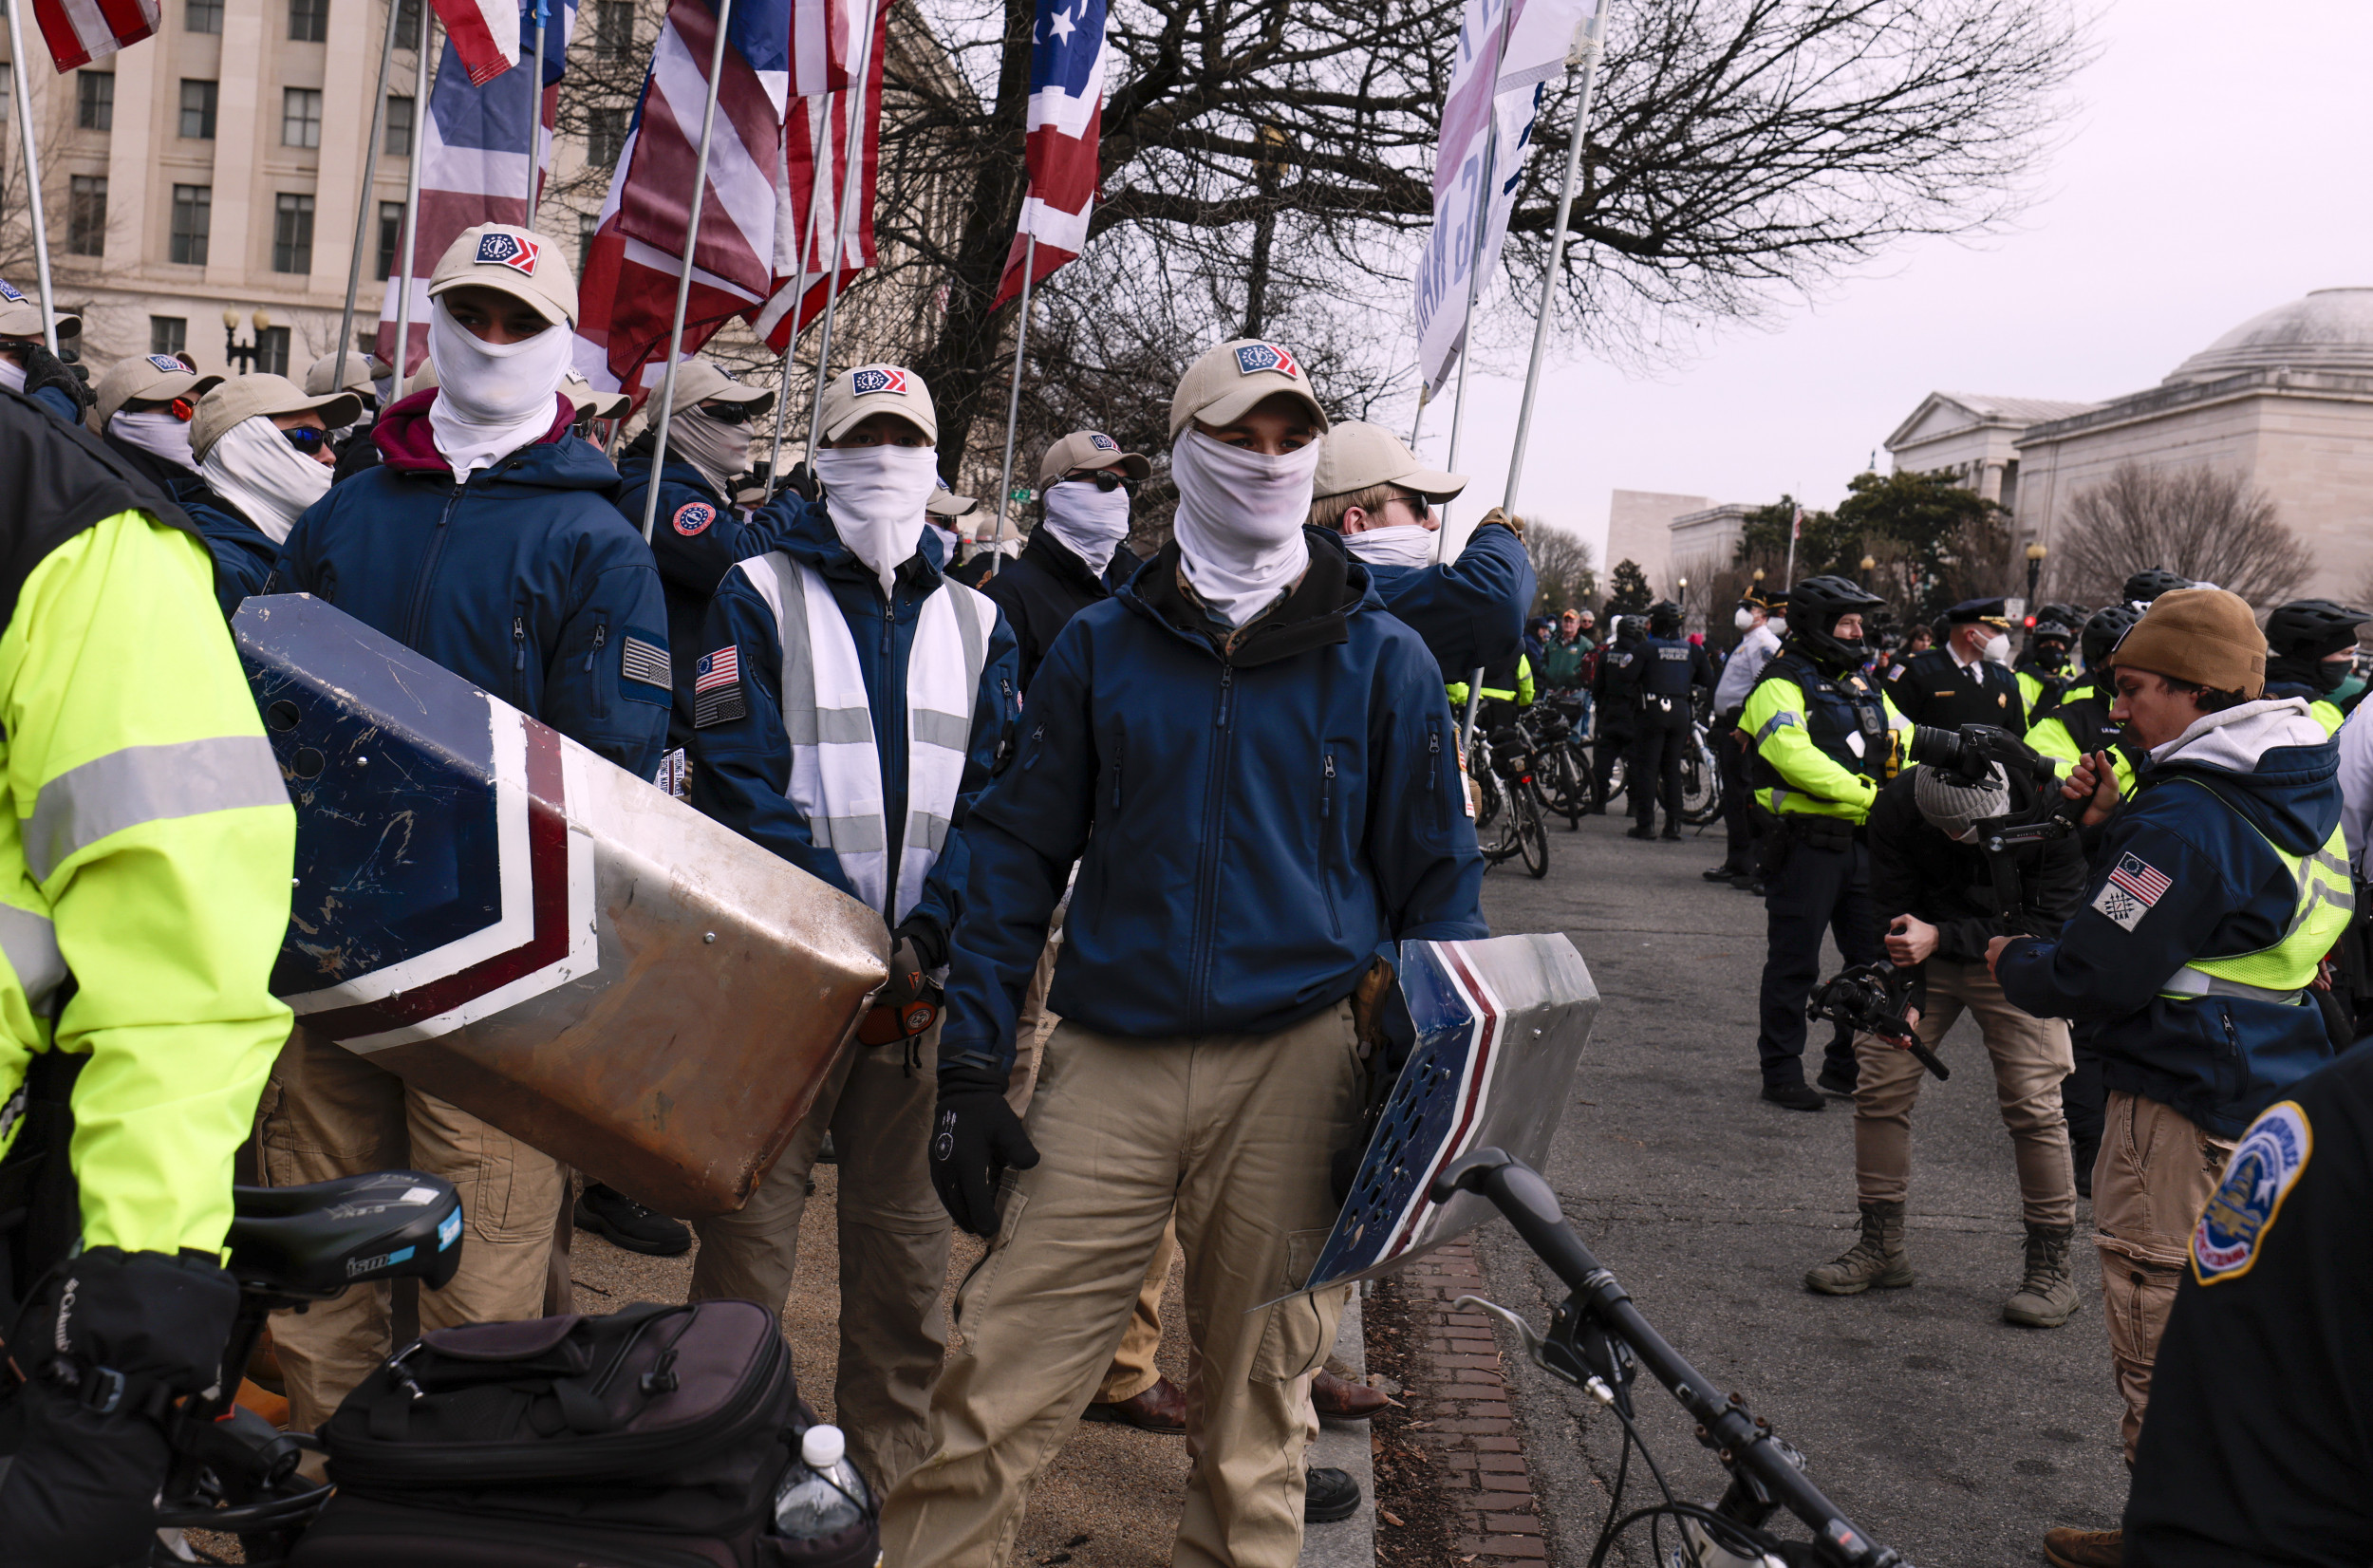 Masked White Supremacist Group Marches Through Boston, Stirs Outrage thumbnail